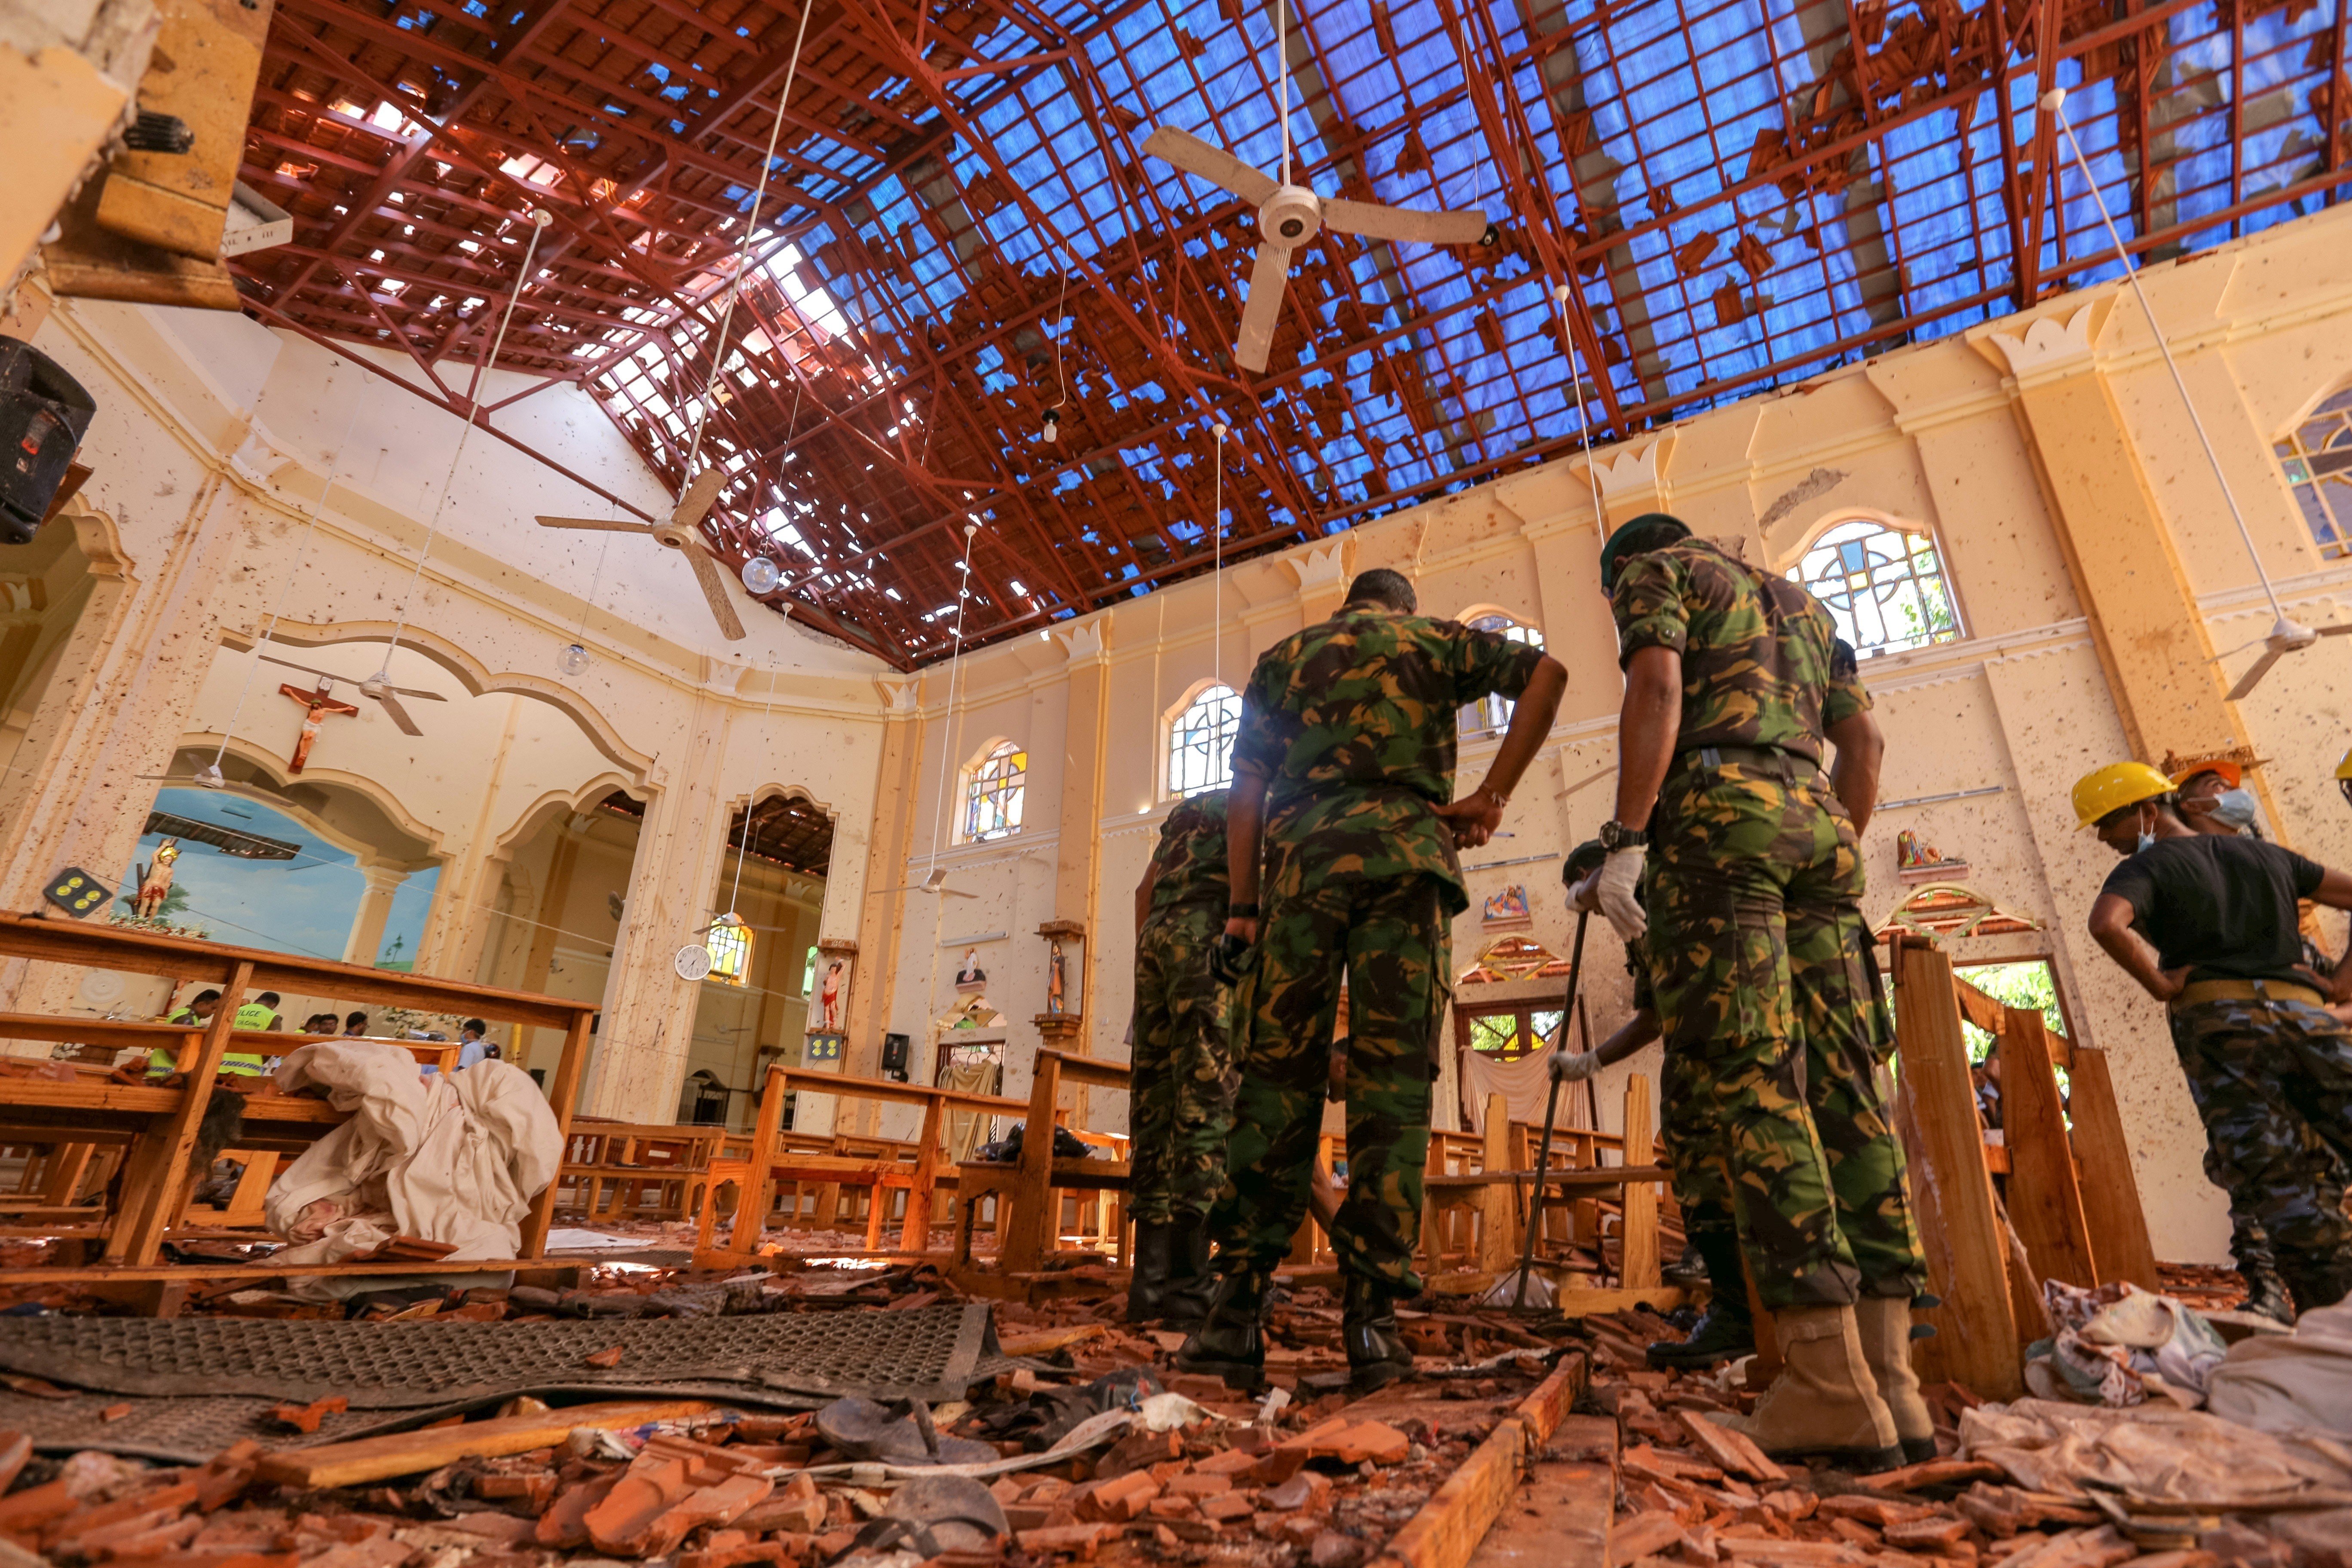 Sri Lankan soldiers inspect the damage following explosions at St. Sebastian's Church in Negombo. Photo: Bloomberg